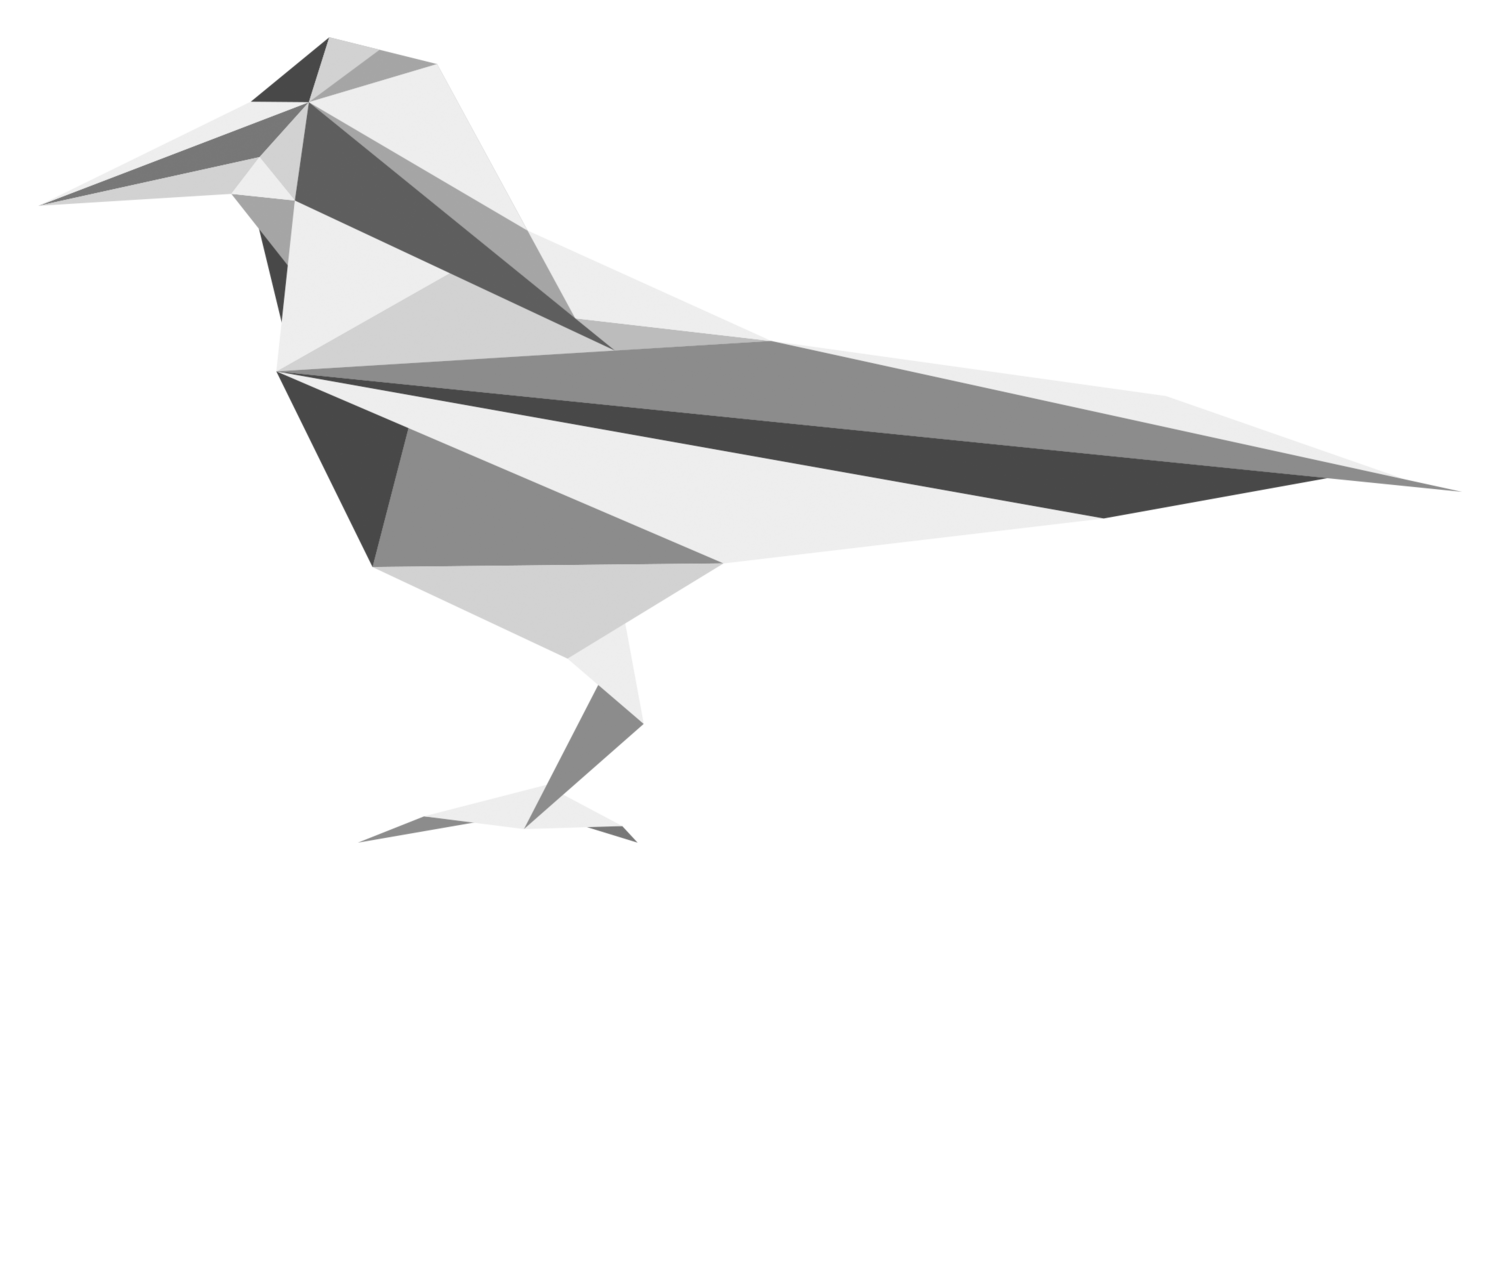 The Gloucestershire Poetry Society an all-inclusive space for Page Poetry &amp; Spoken Word